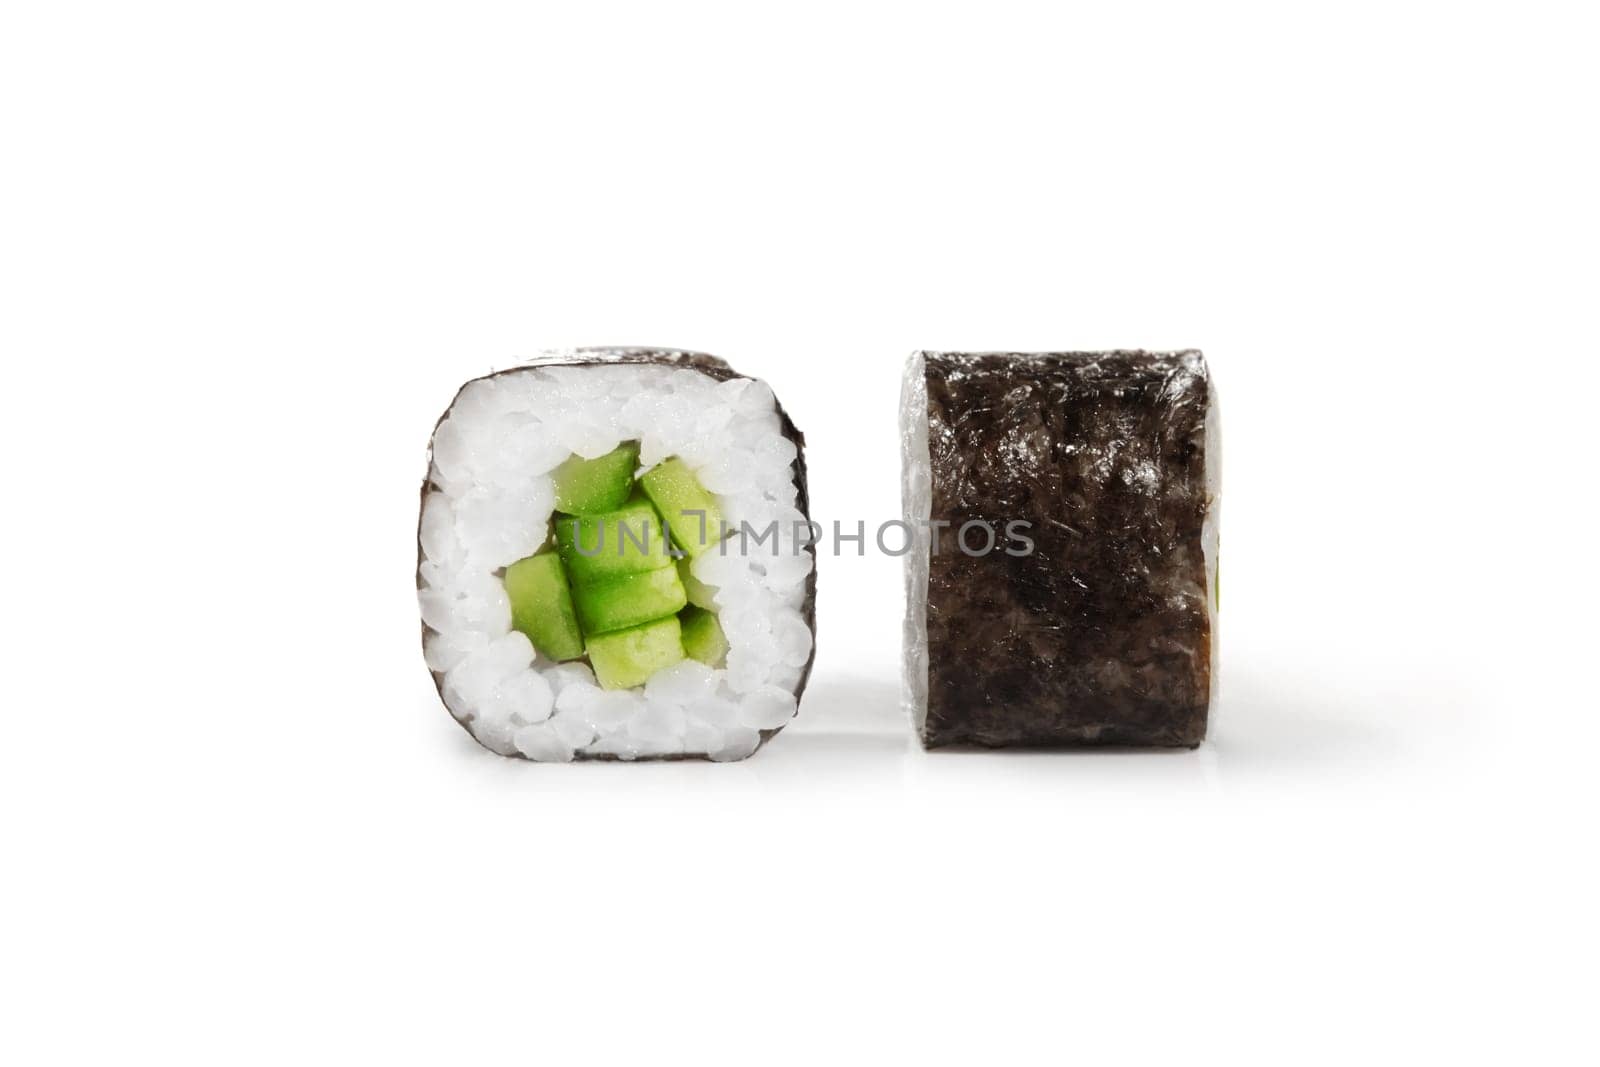 Detailed view of classic kappa maki sushi rolls with chopped fresh cucumbers wrapped in rice and nori seaweed isolated on white background. Authentic Japanese restaurant menu